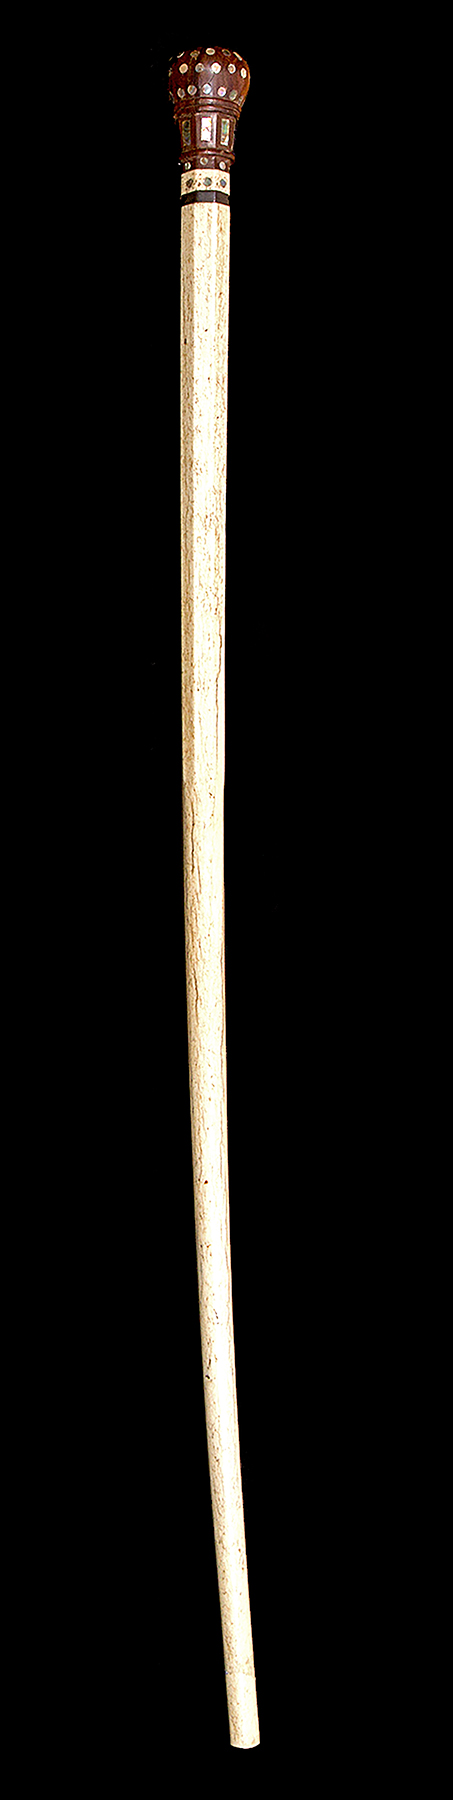 Antique and Quality Modern Cane Auction - 7b.jpg